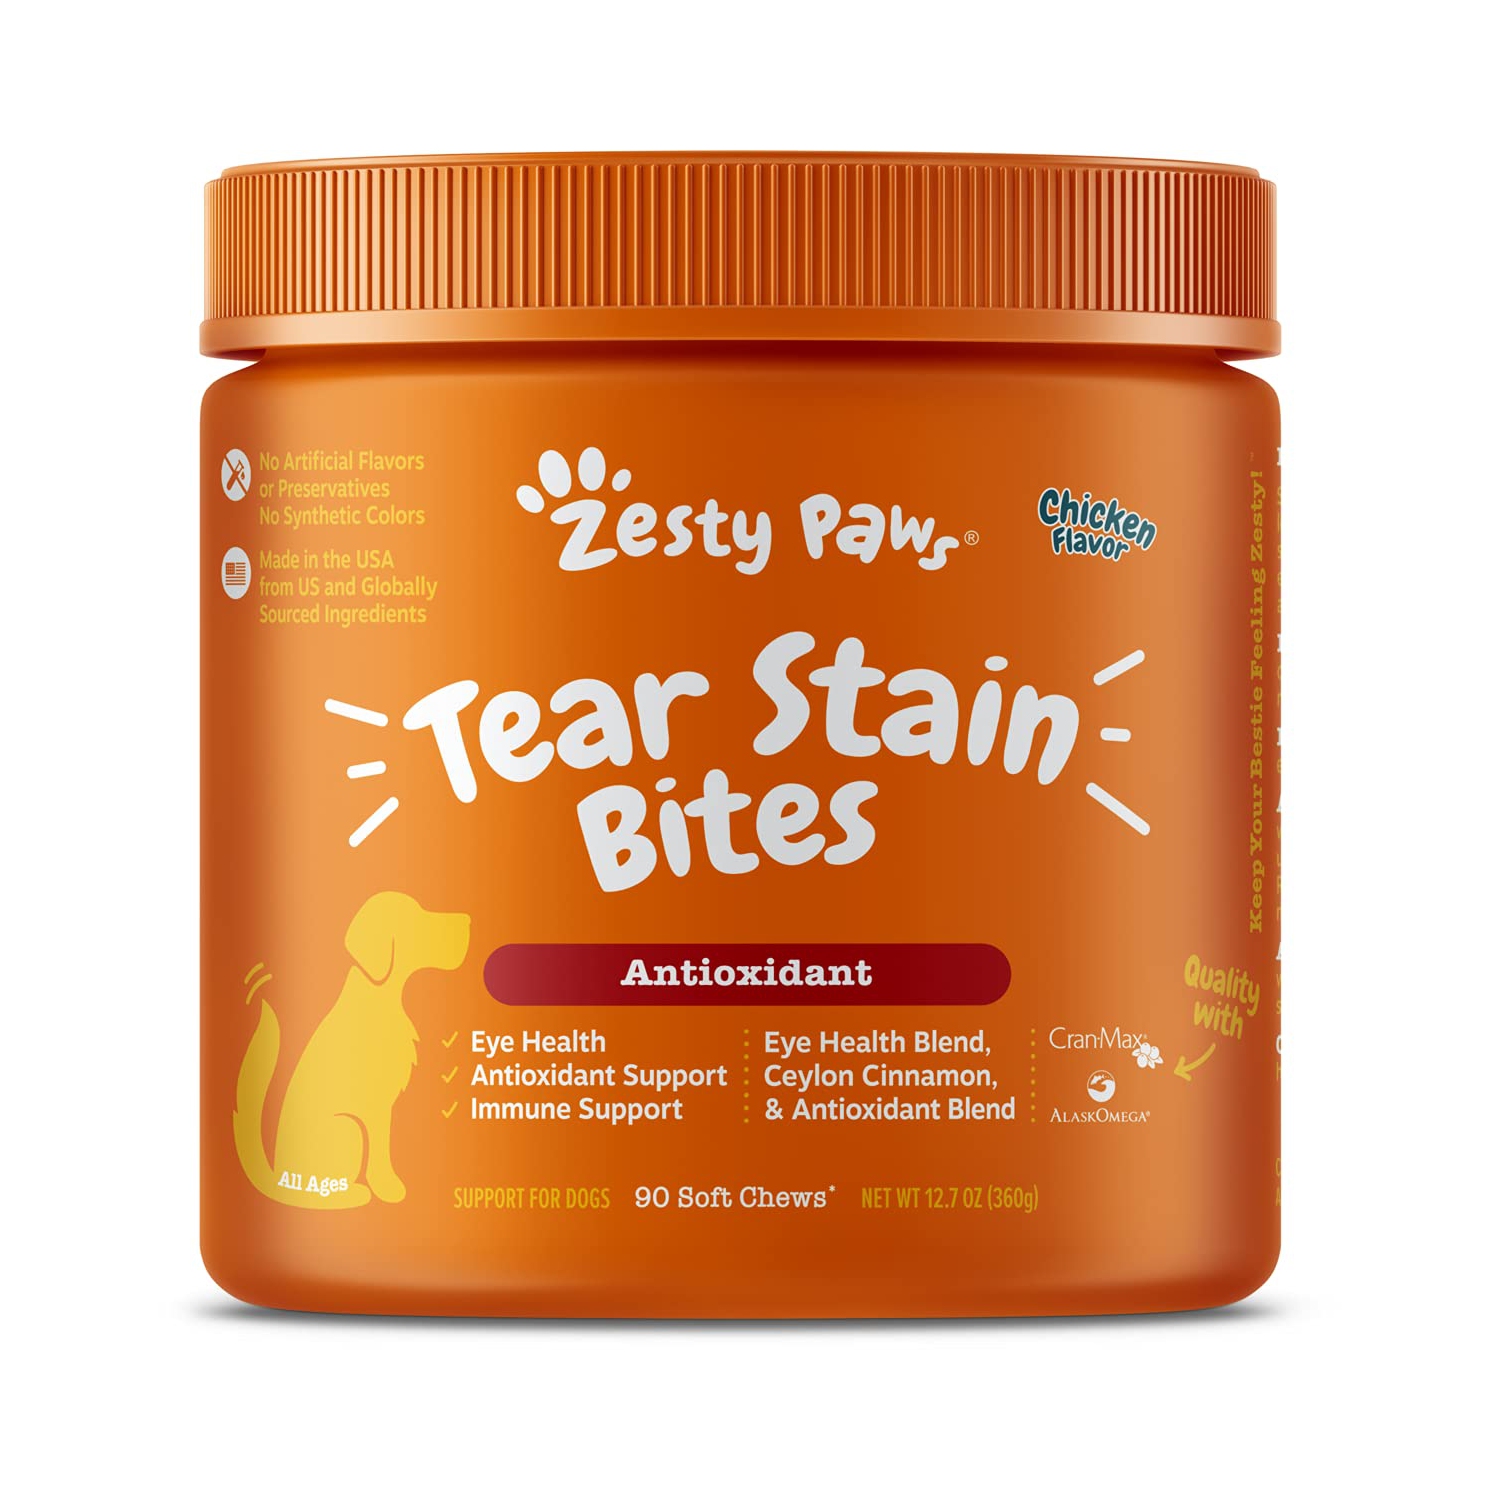 Tear Stain Support Soft Chews for Dogs - Enhance Moisture, Vision, and Immune System with Fish, Lutein, Cranberry, Vitamin C - Chicken Flavor - 90 ct